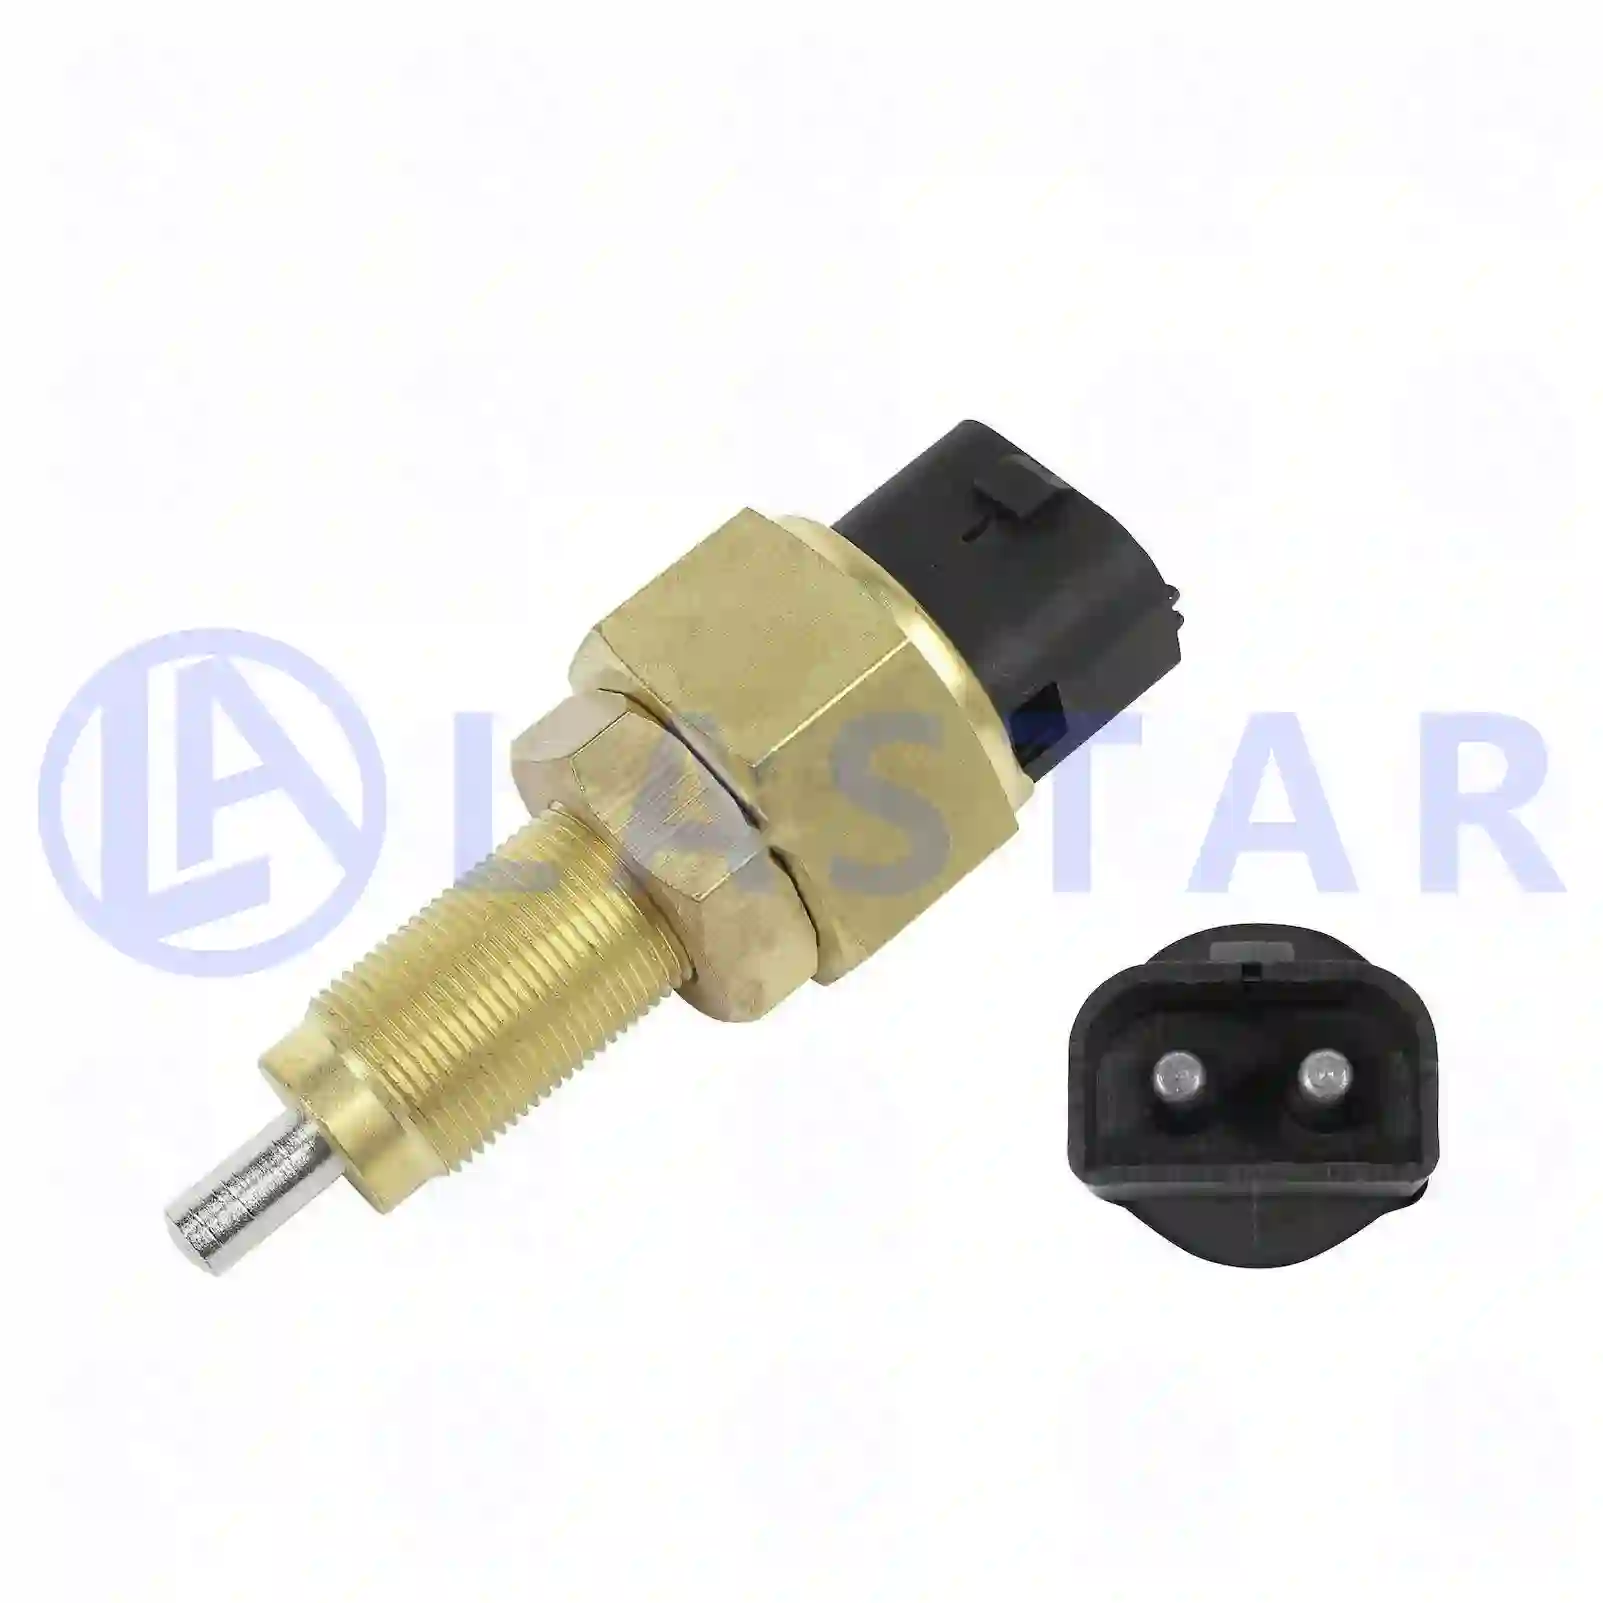 Switch, differential lock, 77707624, 1594045, 3962939, ZG20981-0008 ||  77707624 Lastar Spare Part | Truck Spare Parts, Auotomotive Spare Parts Switch, differential lock, 77707624, 1594045, 3962939, ZG20981-0008 ||  77707624 Lastar Spare Part | Truck Spare Parts, Auotomotive Spare Parts